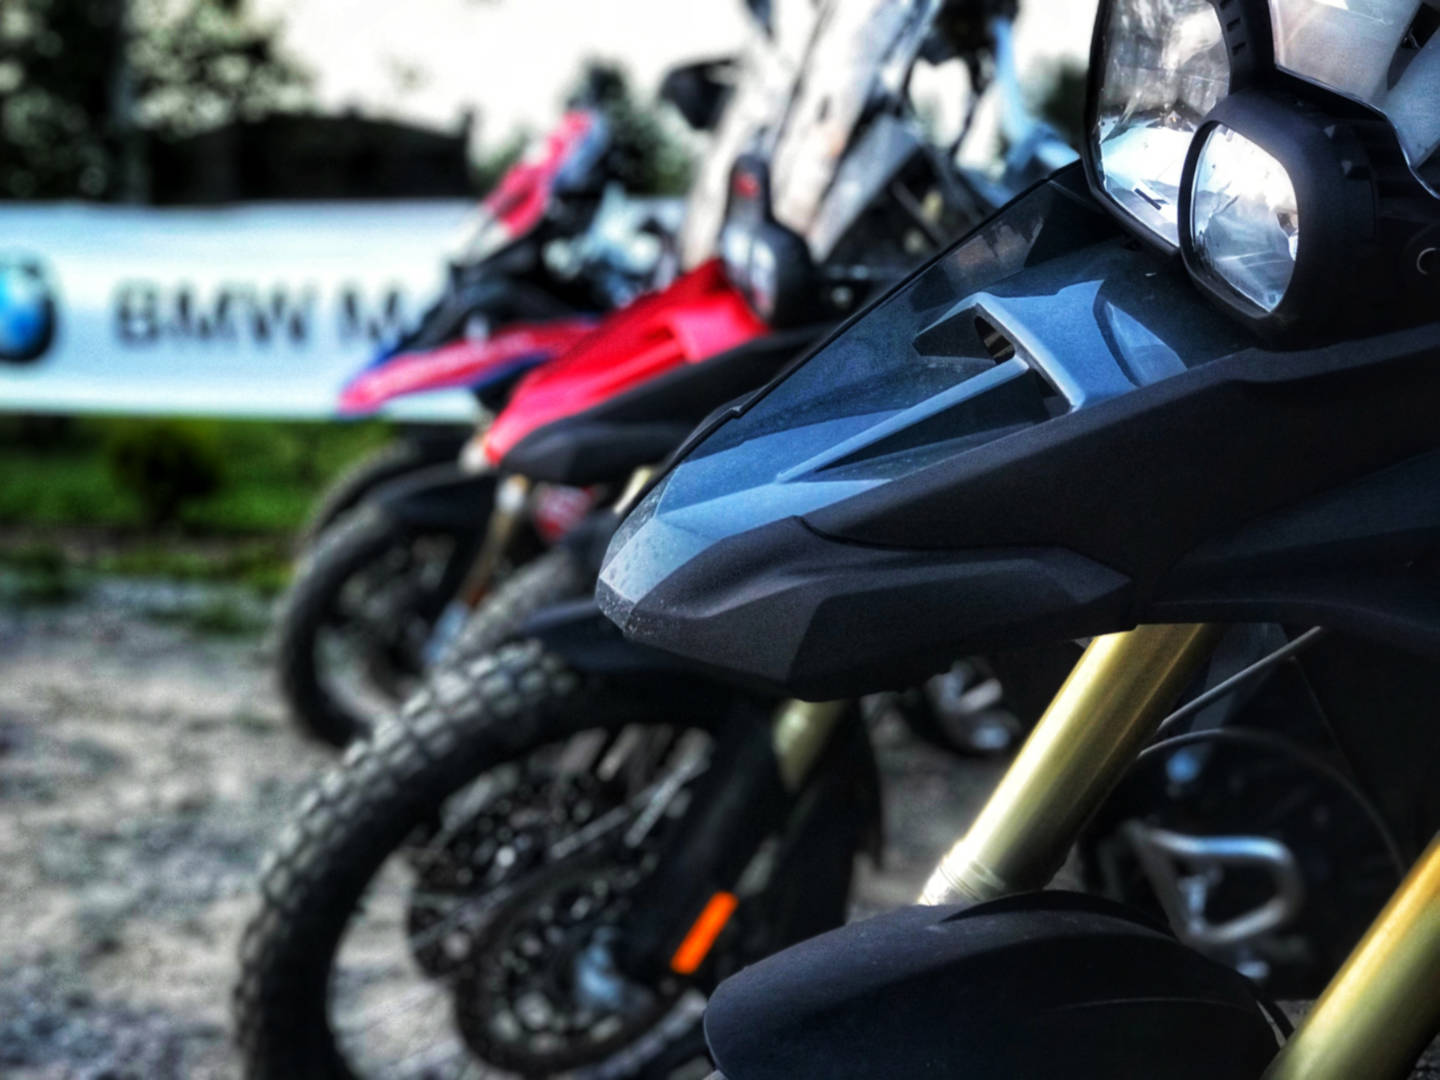 The BMW adventure motorcycle demo-ride lineup at FAR